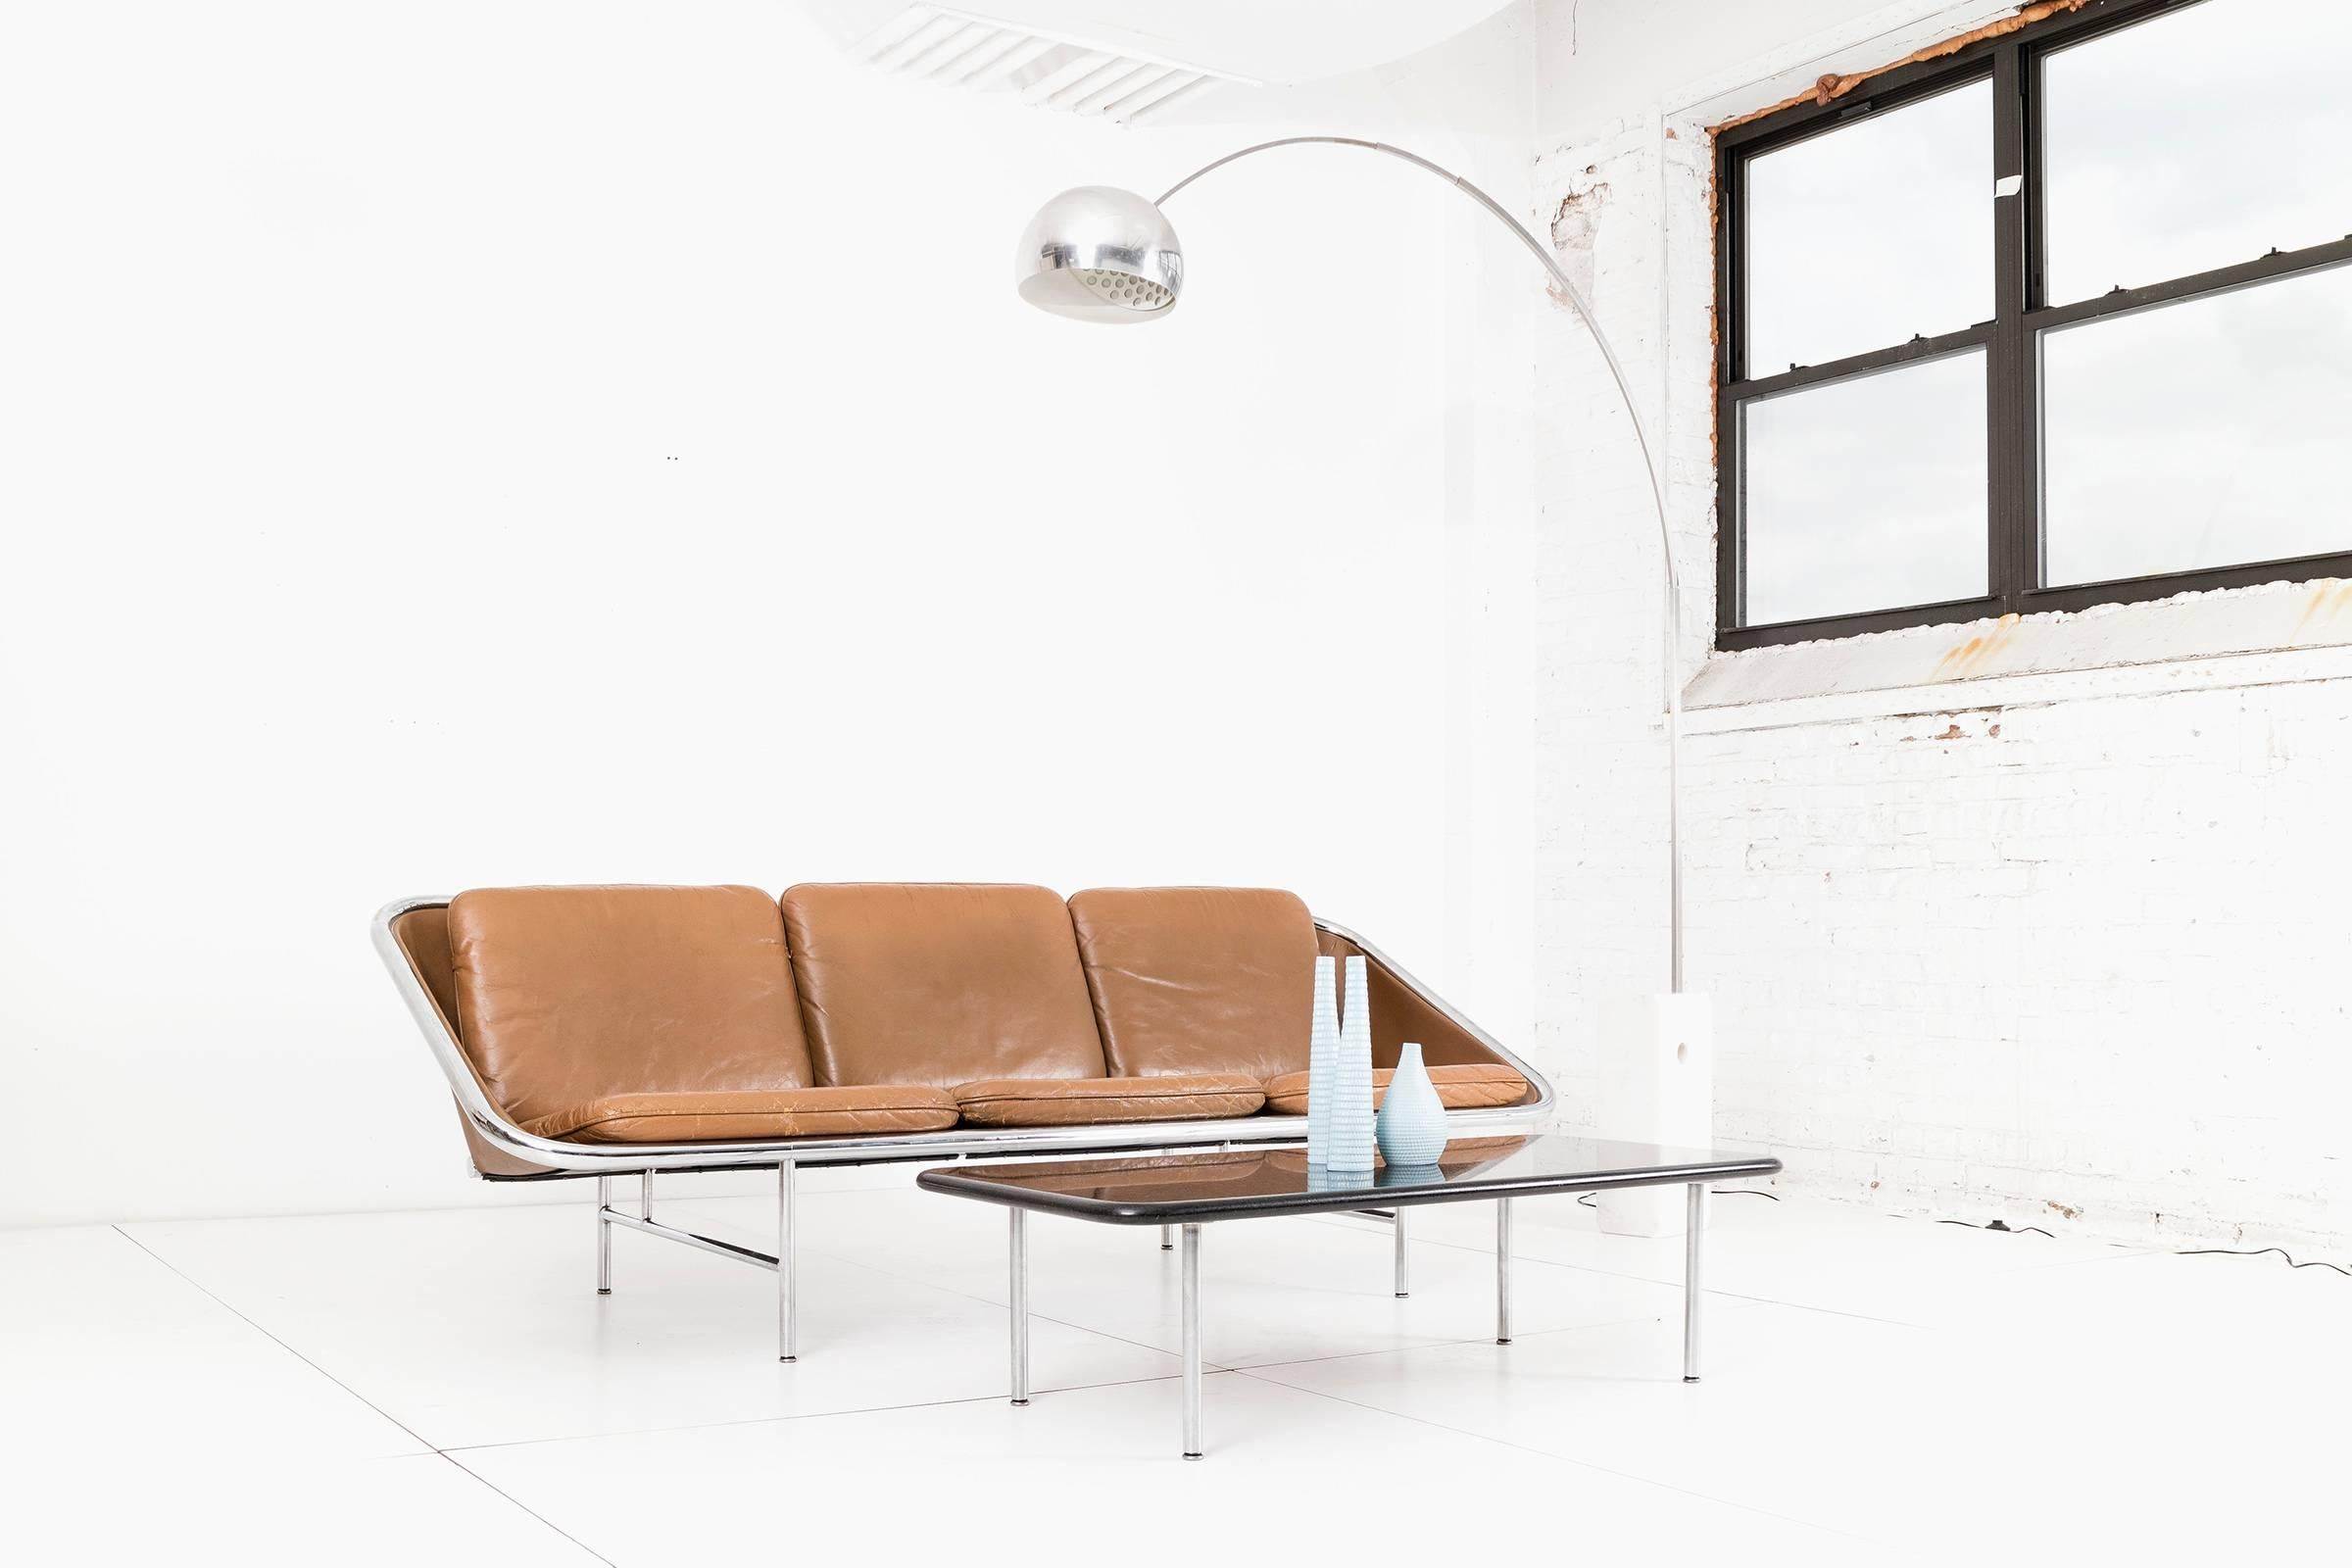 Model 6832 designed in 1963 by George Nelson & Associates for Herman Miller. Chrome-plated tubular steel frame with neoprene reinforced rubber decking and straps.
Original leather in sound vintage condition, cushions with great patina, crazing as